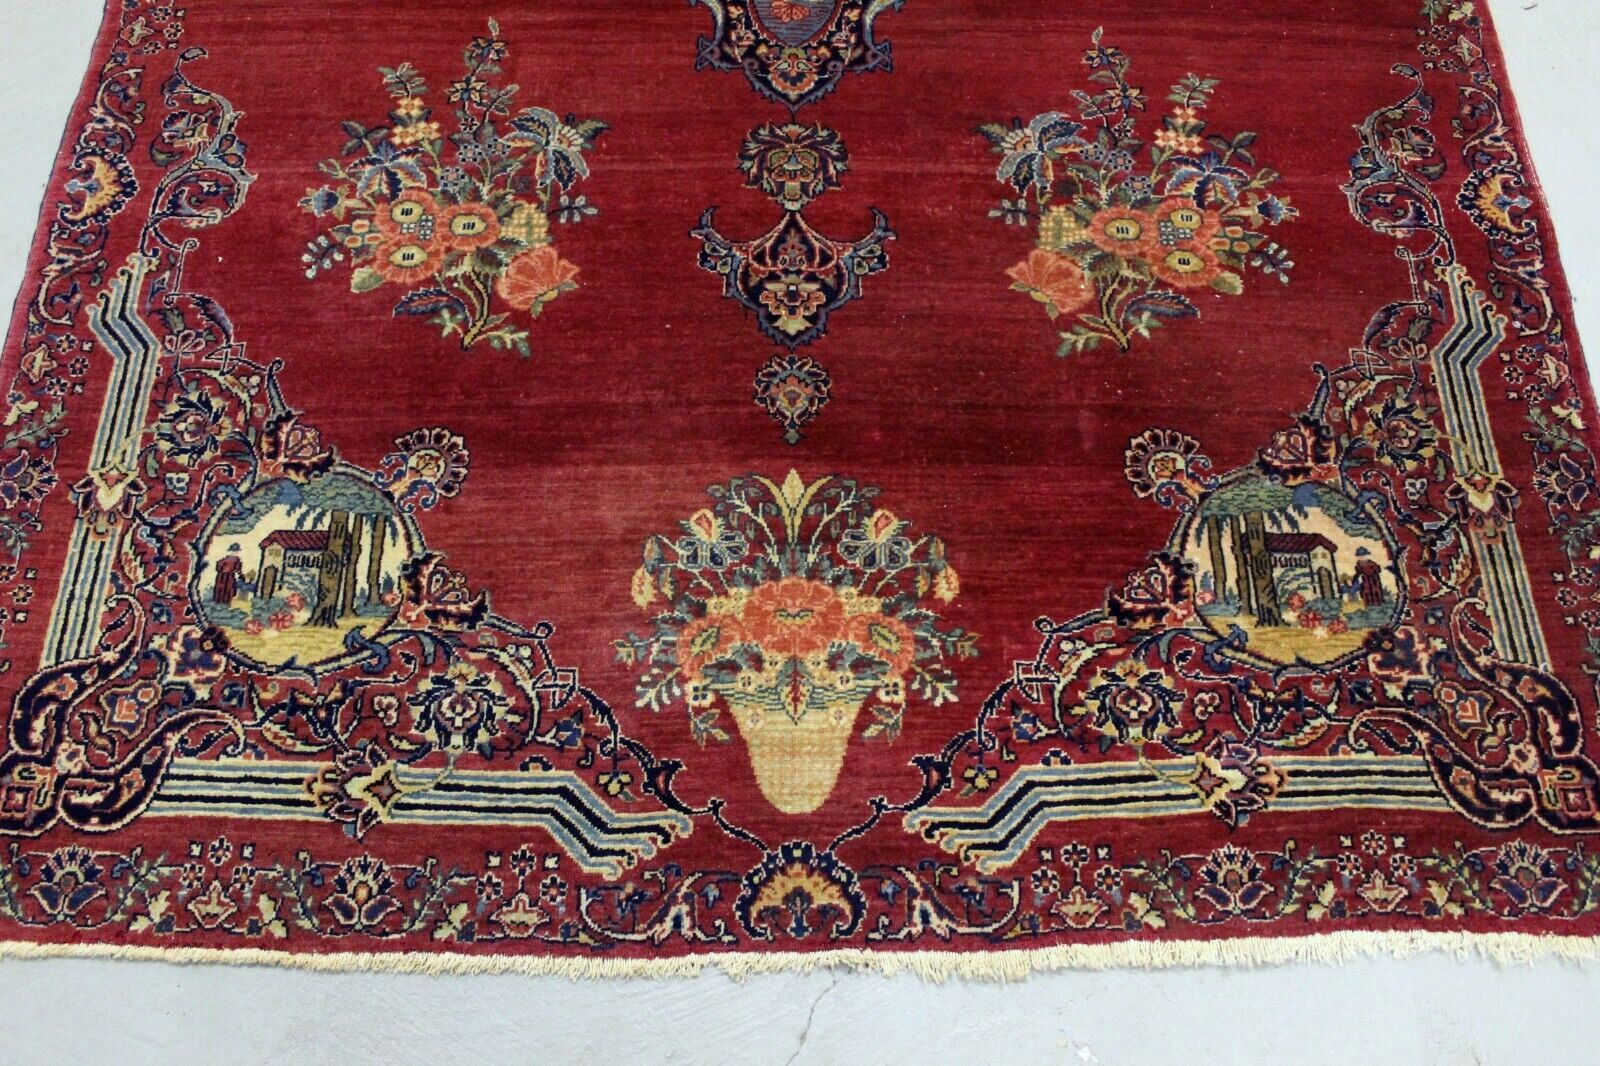 Intricate Floral Patterns and Ornate Detailing Surrounding Central Pictorial Elements on Antique Kerman Rug - 1920s